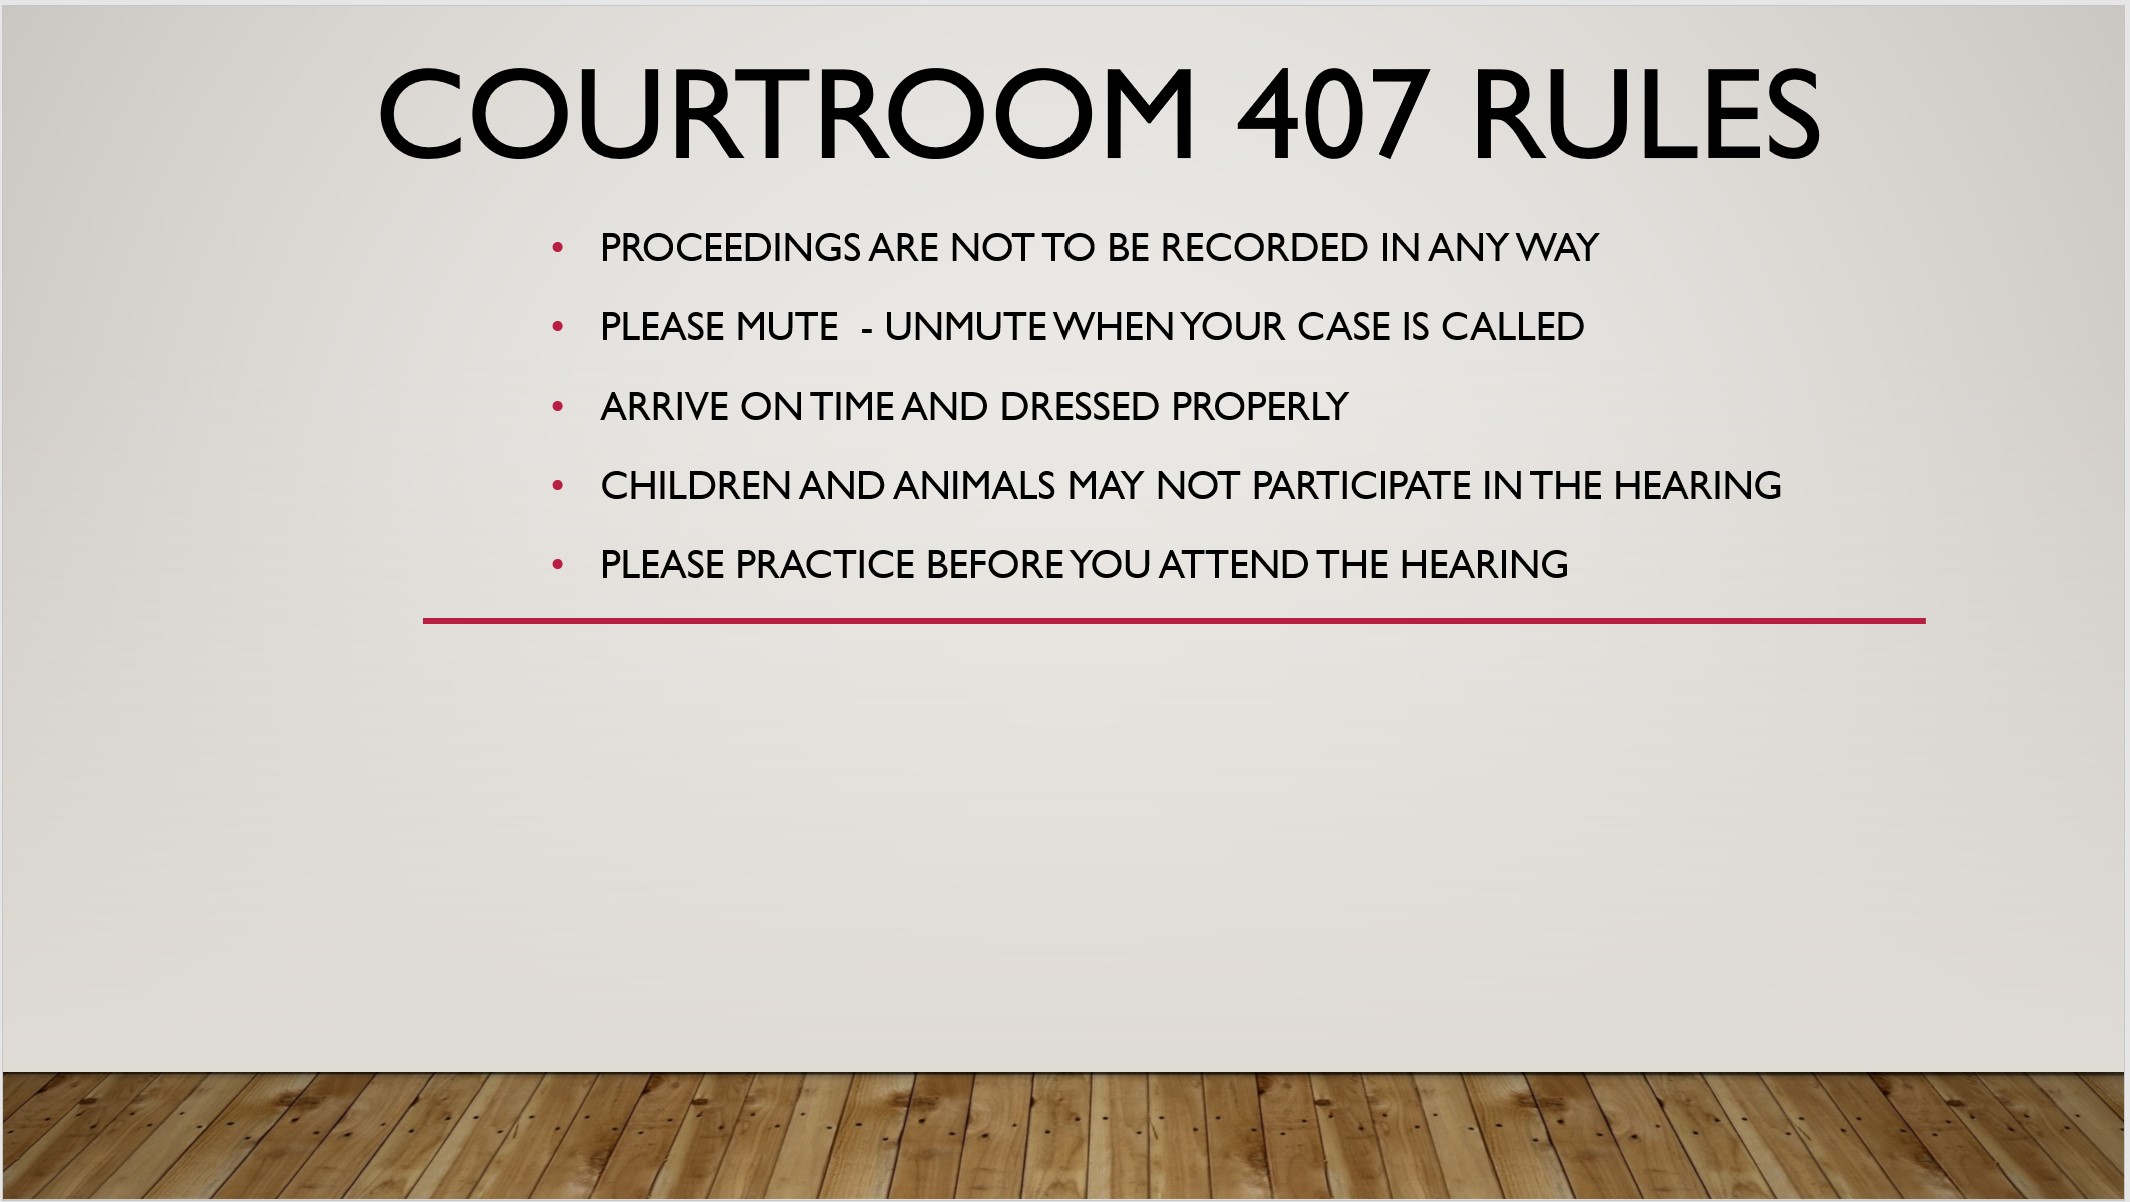 CourtRoom407Rules